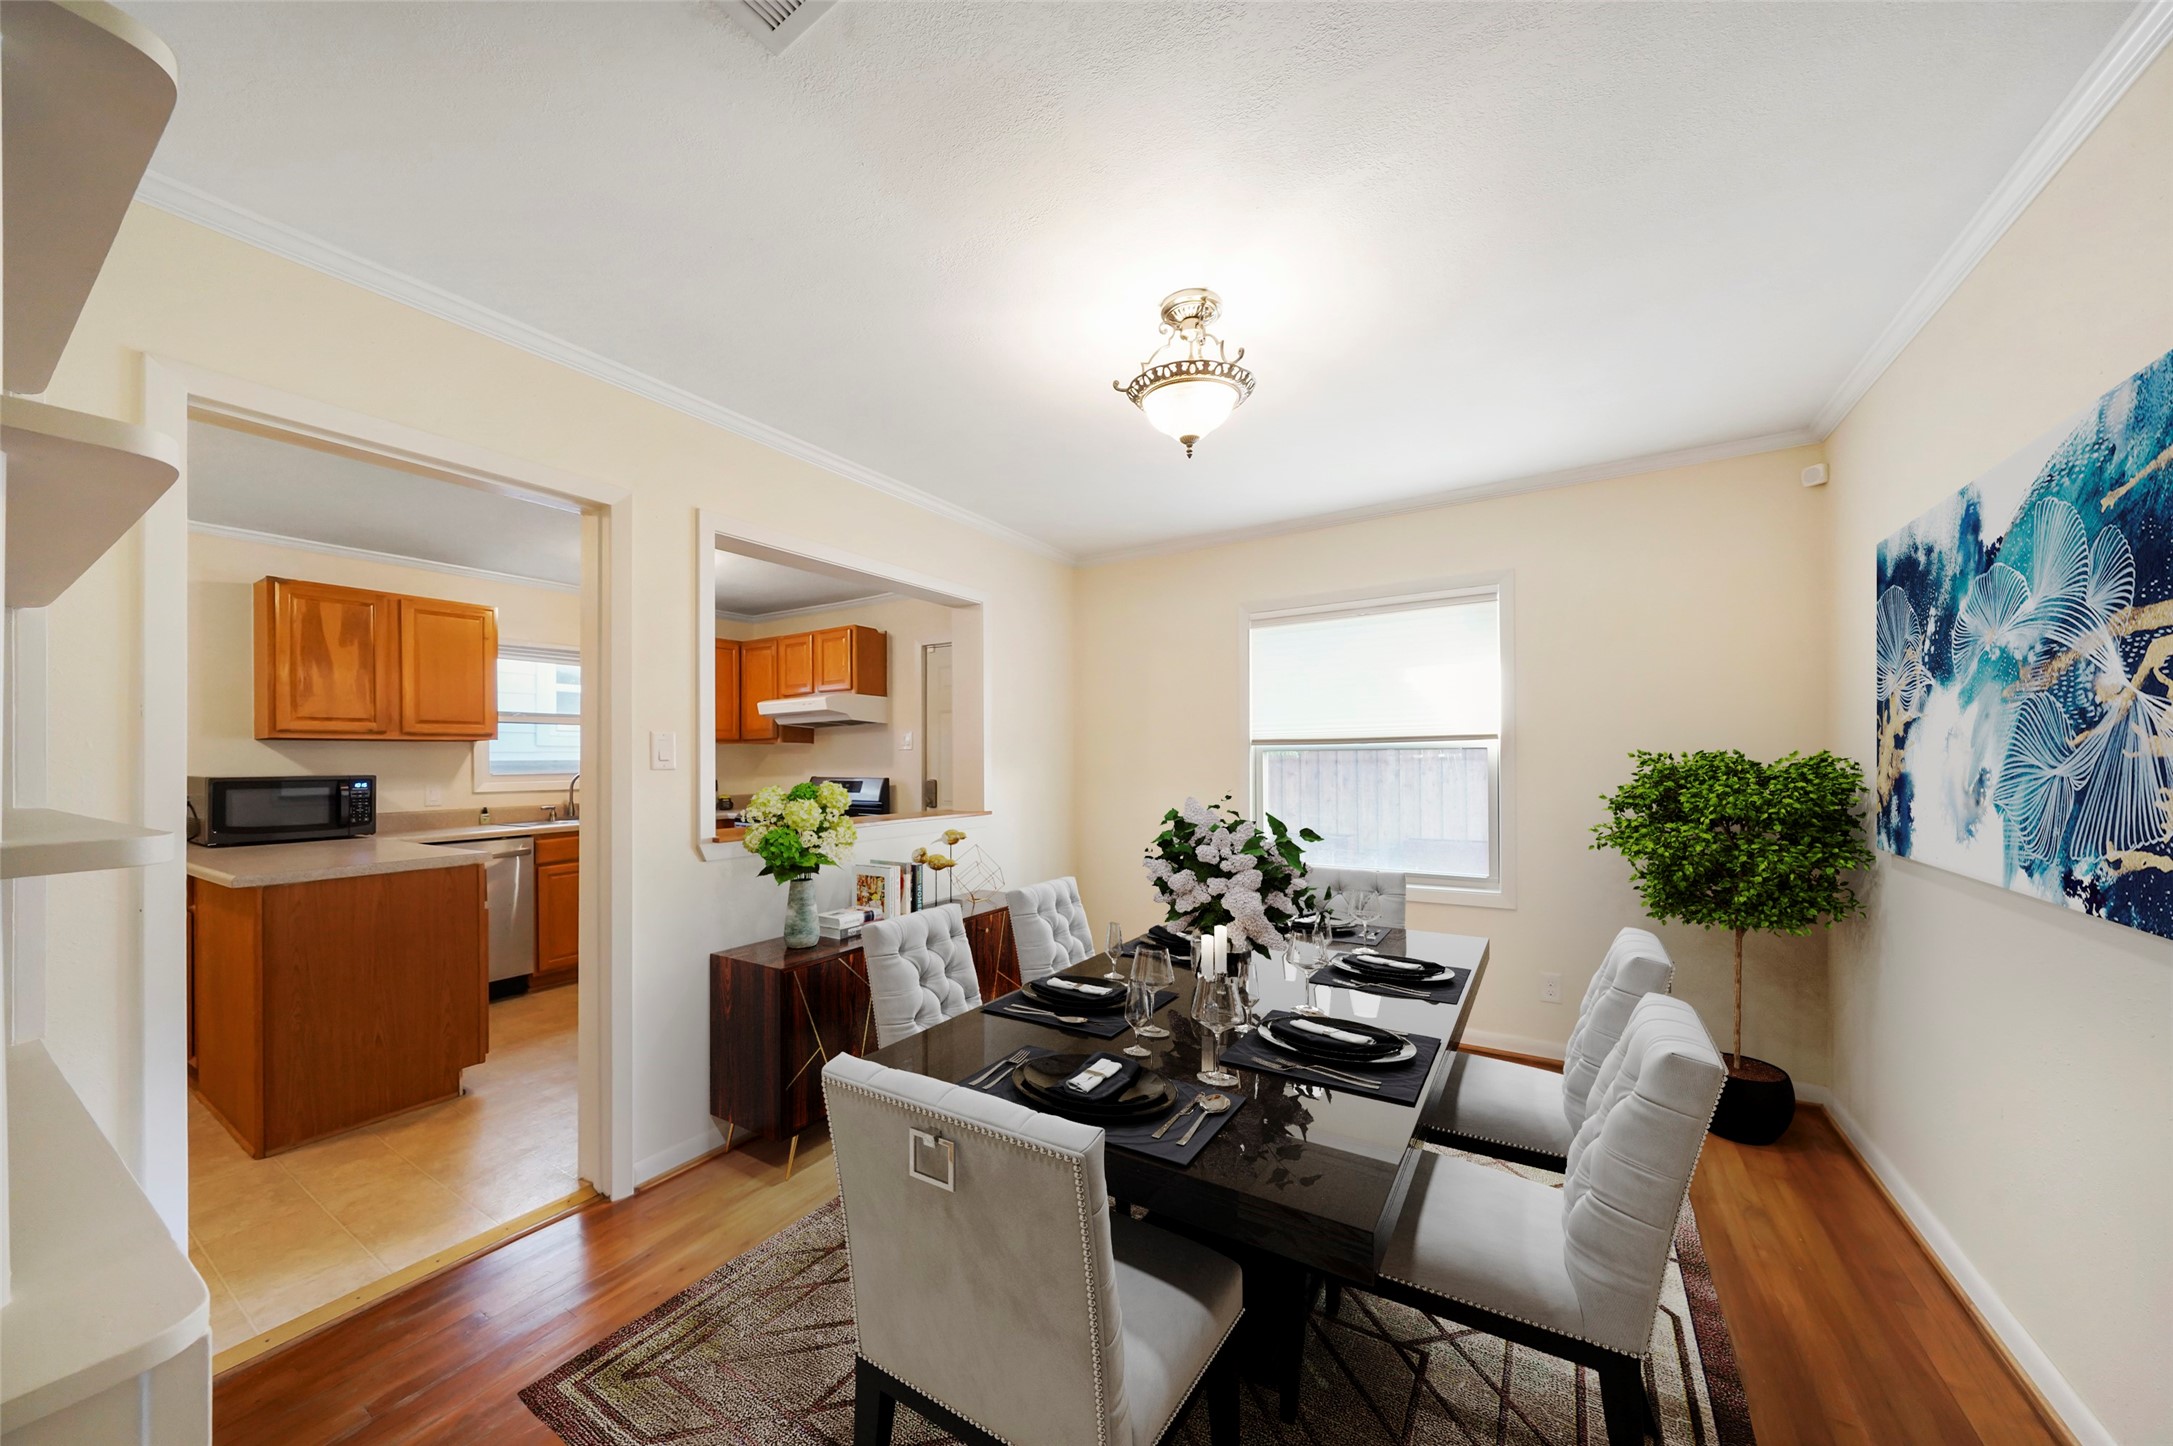 Formal dining space next to kitchen. Perfect for spending time with family or friends after work.